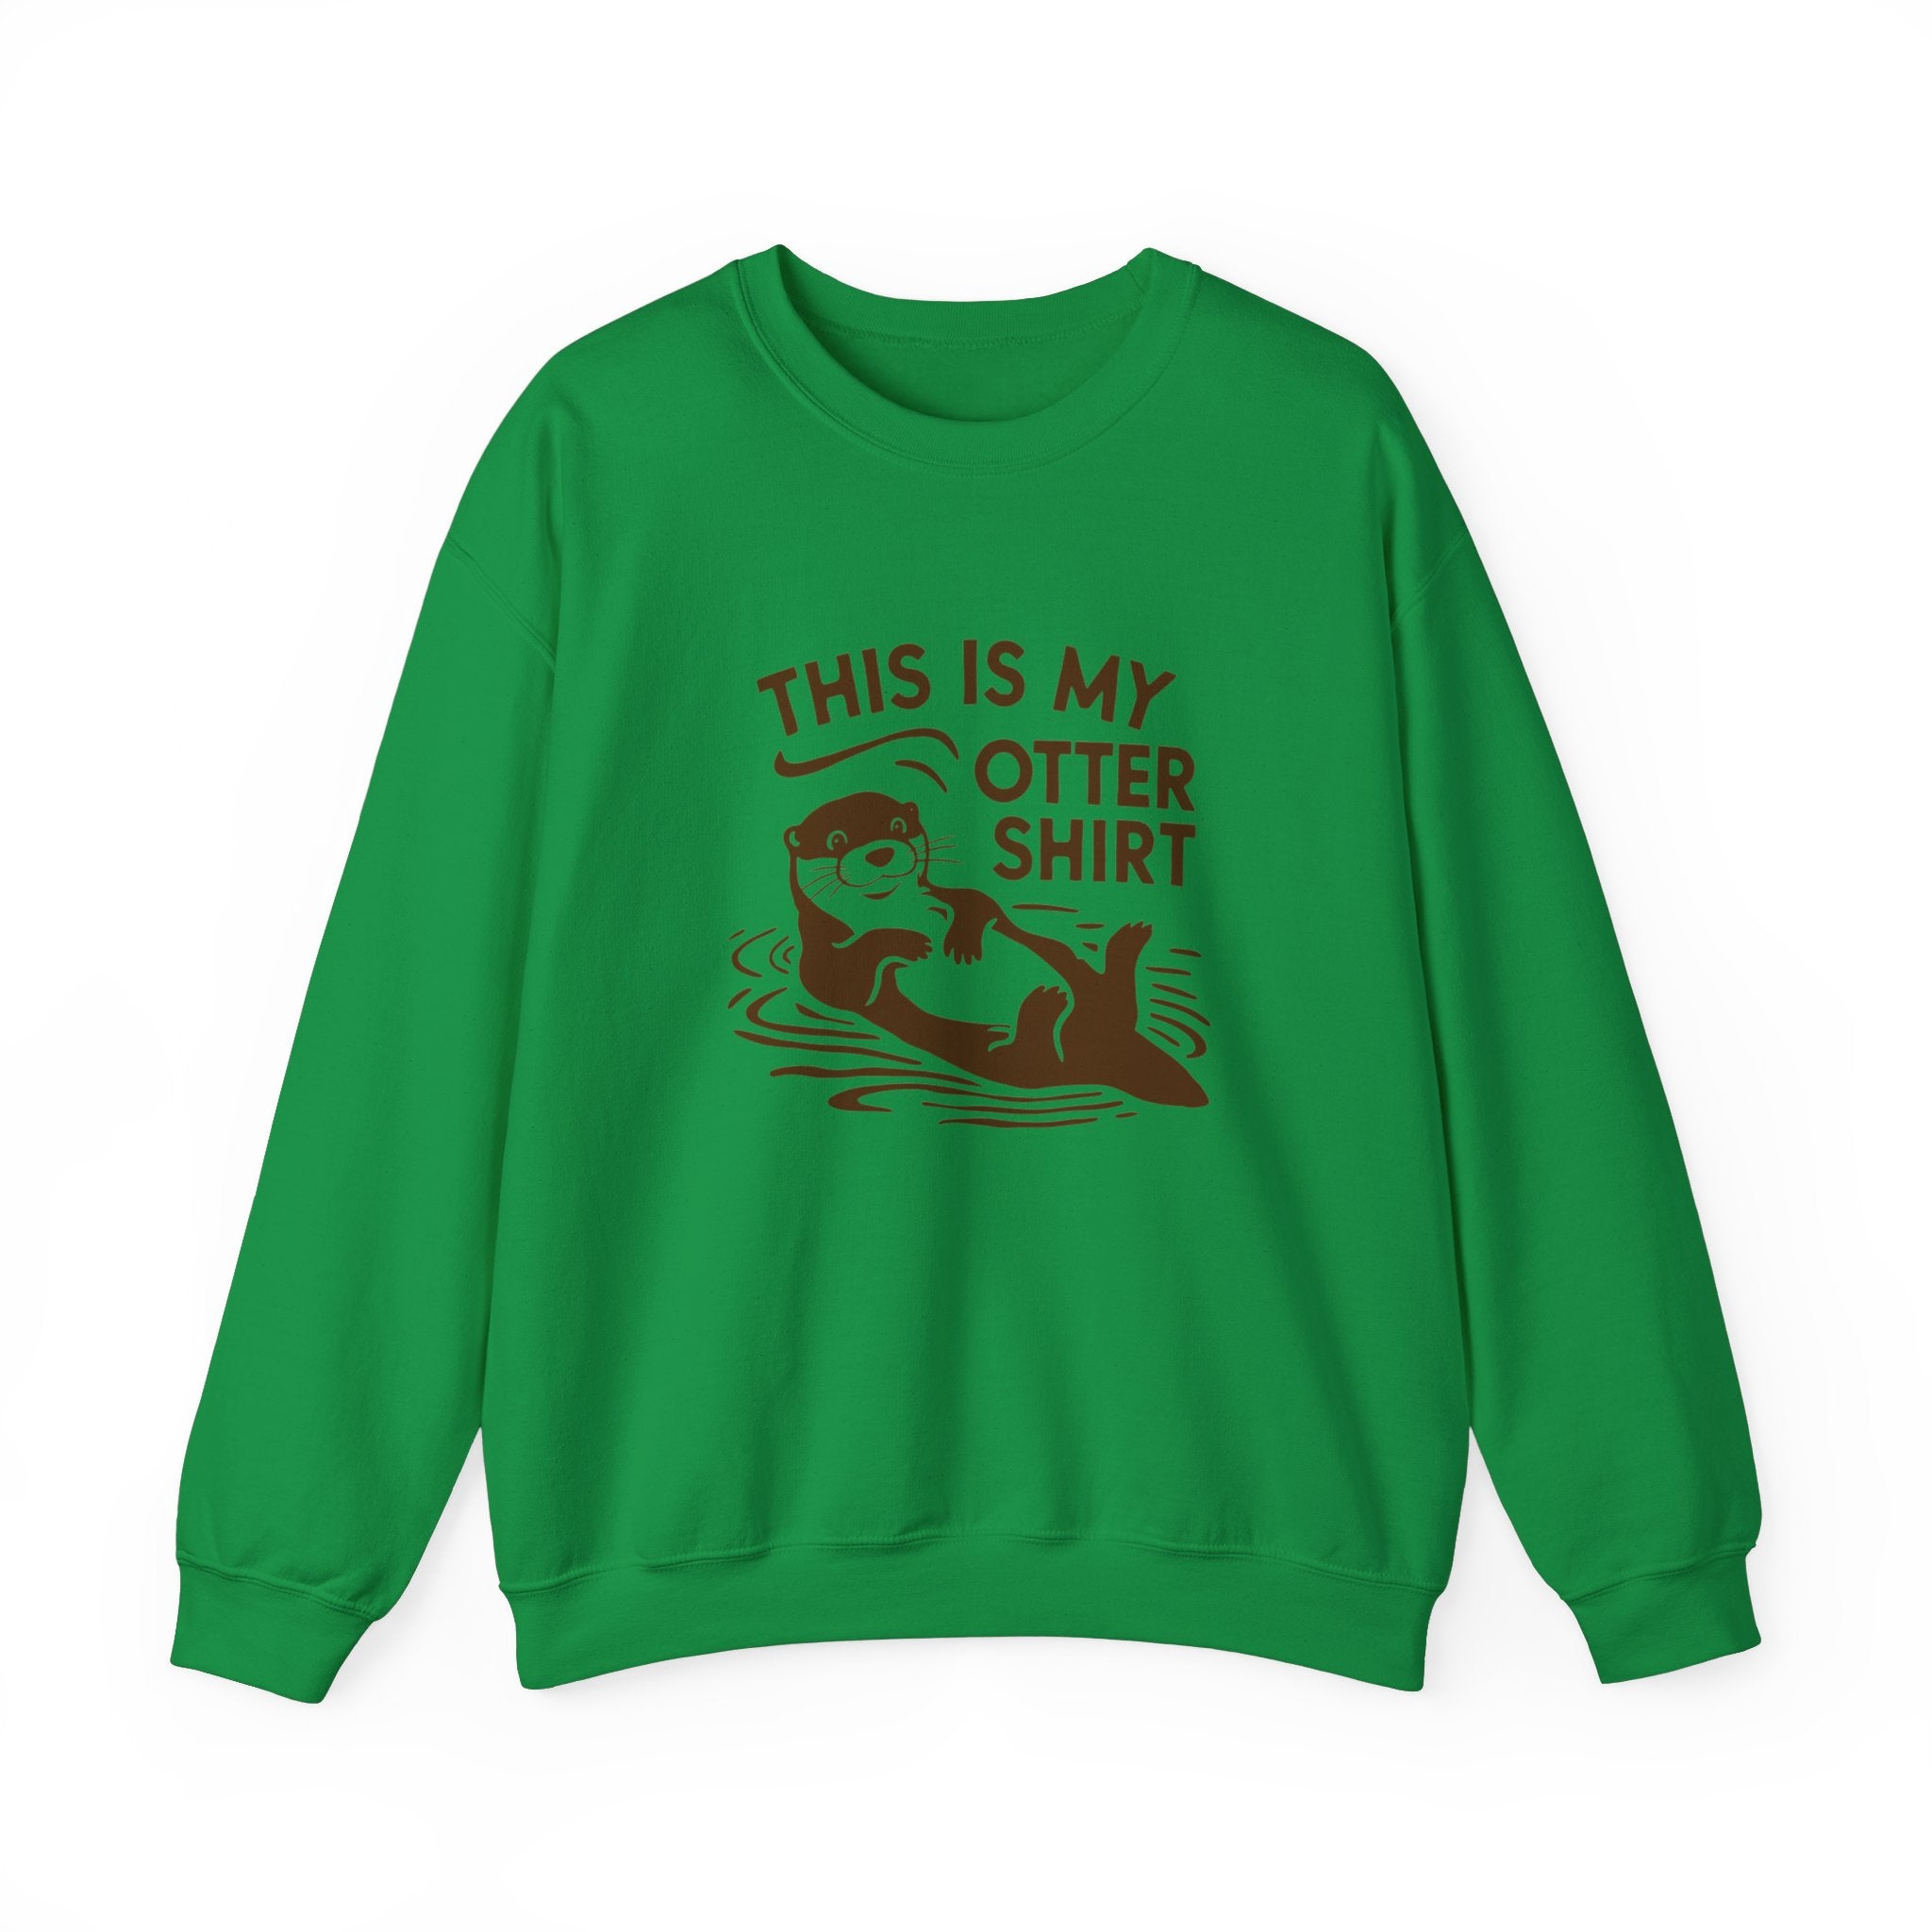 Cozy, green My Otter Shirt - Sweatshirt perfect for the chilly seasons, featuring an illustration of an otter with the text "This is My Otter Shirt" in red.